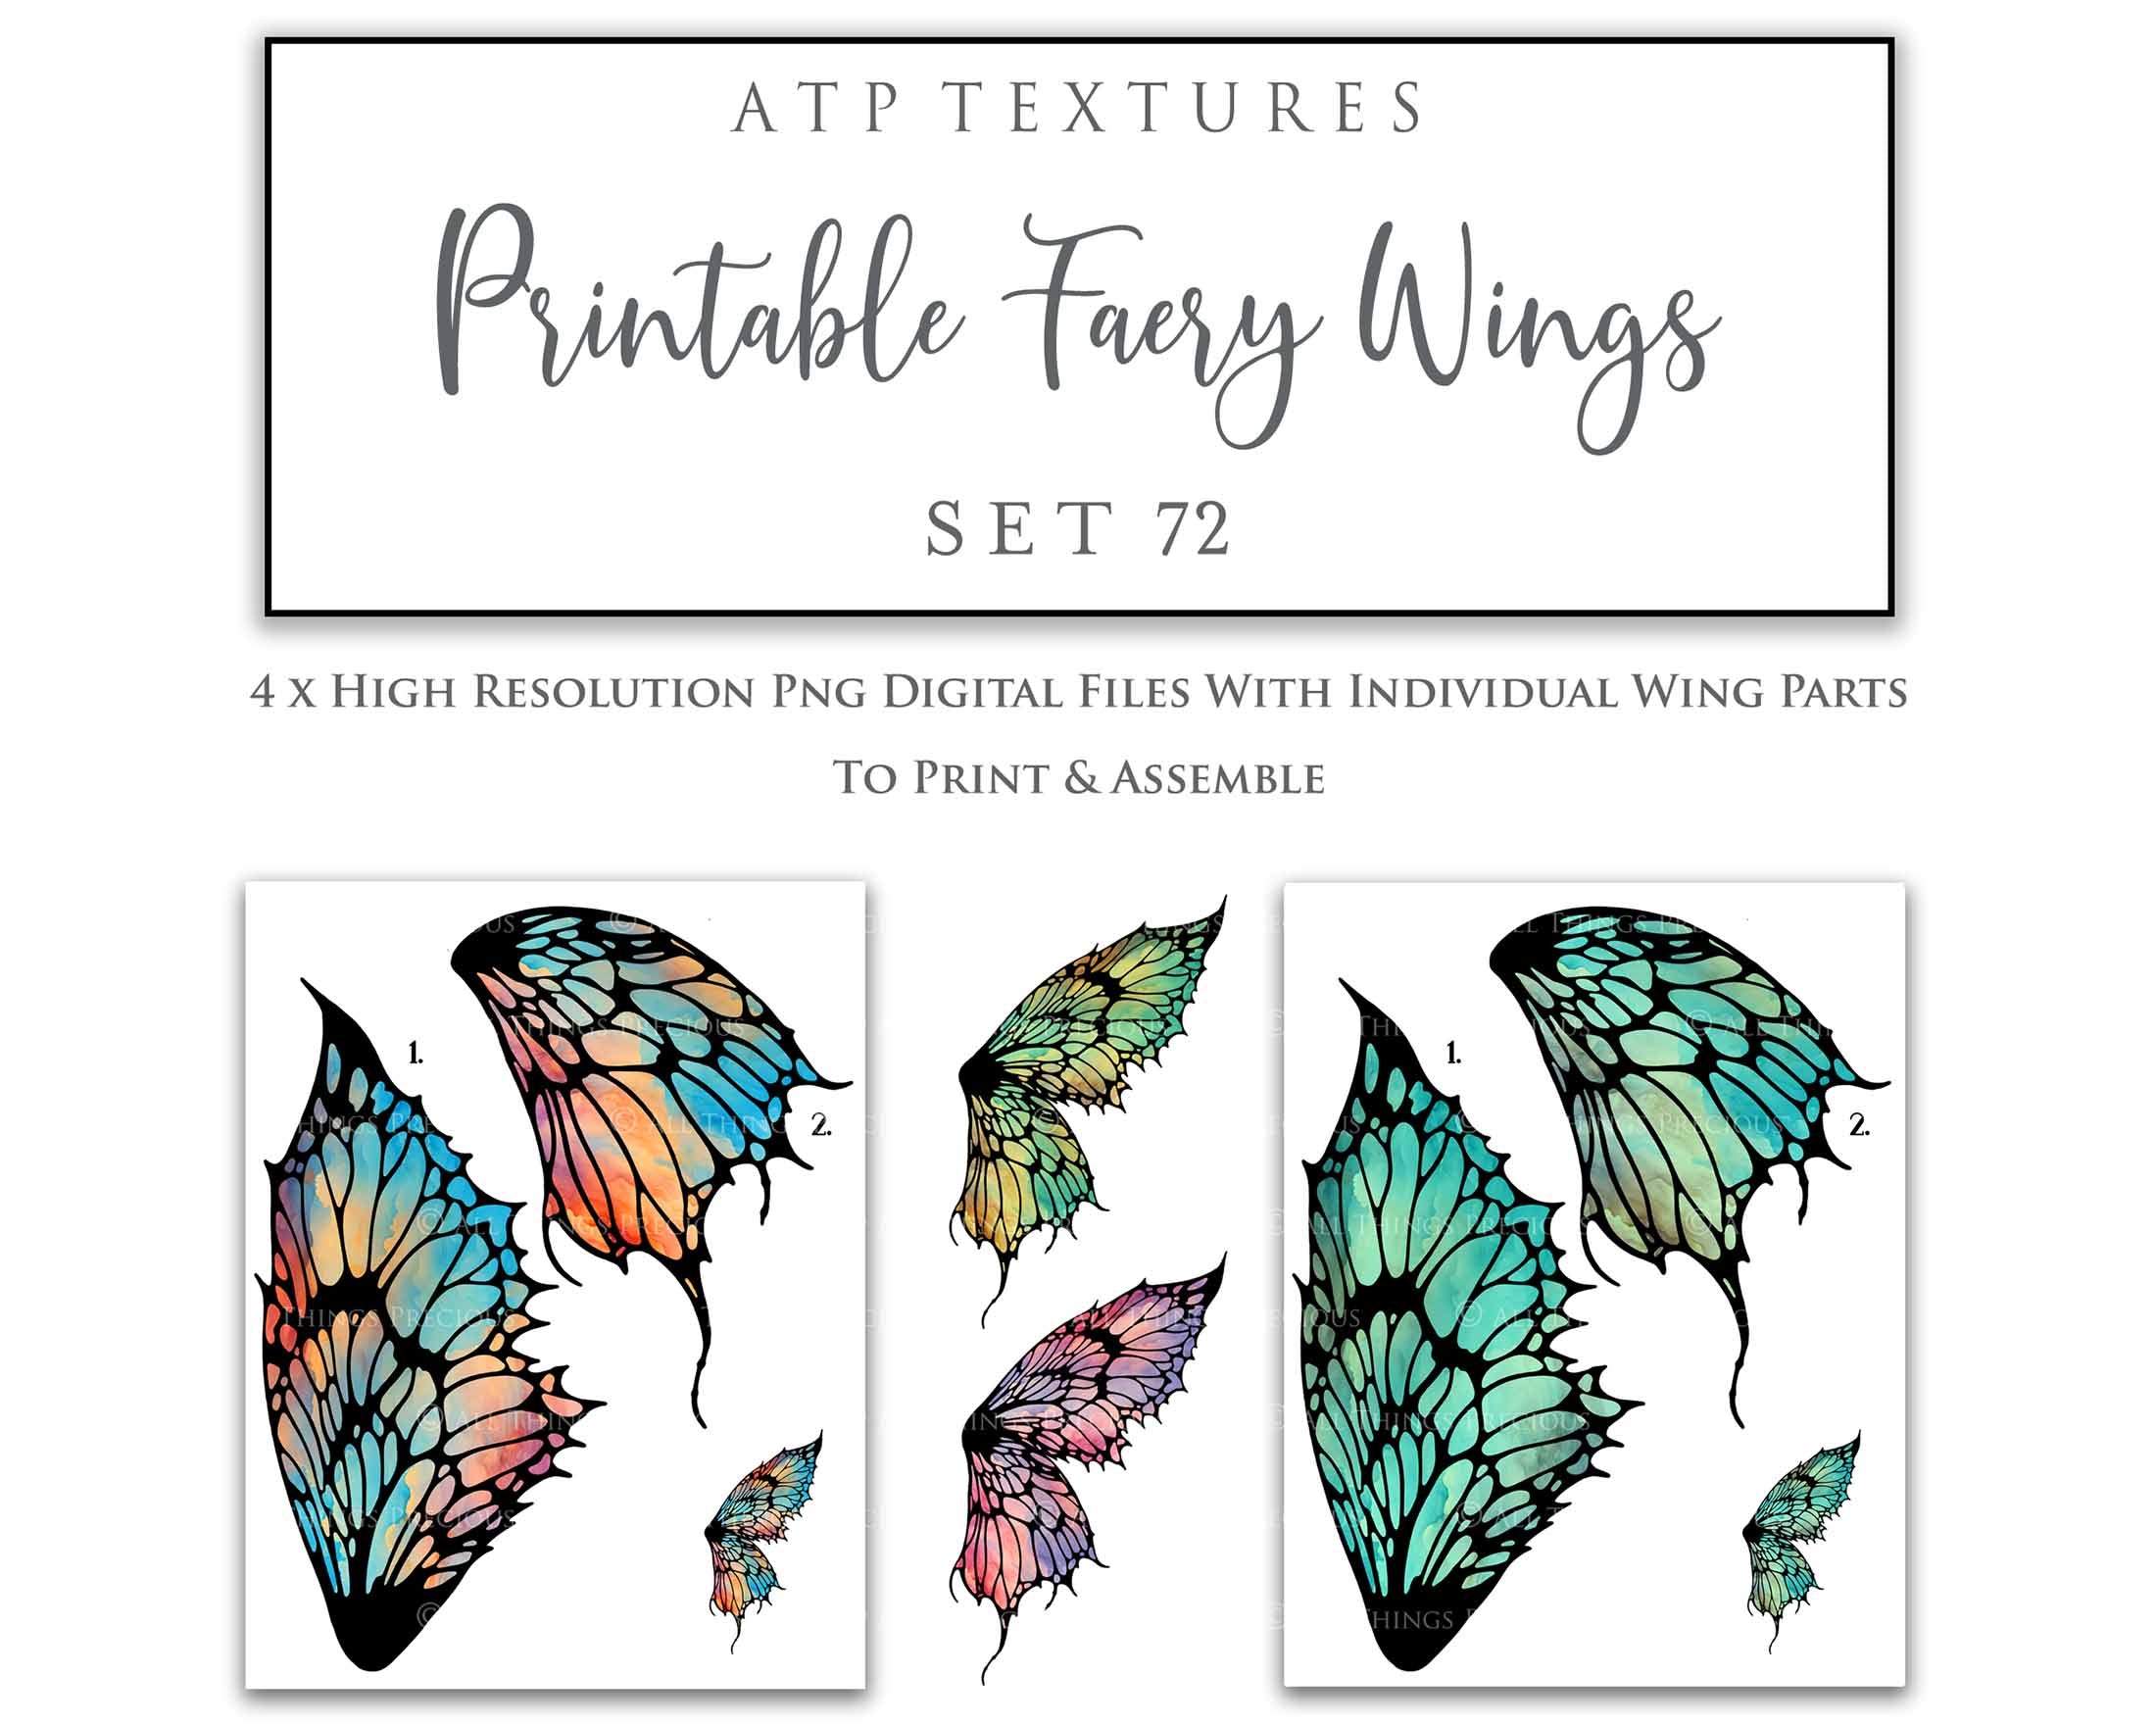 Printable Fairy Wings. For Art Dolls, Adults, Kids. High resolution, png files. This is a digital product. Print and cut Pattern template. Paper craft. Create fairy wing earrings or crown jewelry from these designs. Cosplay Costume Crafts. Commercial licence is available. Halloween.